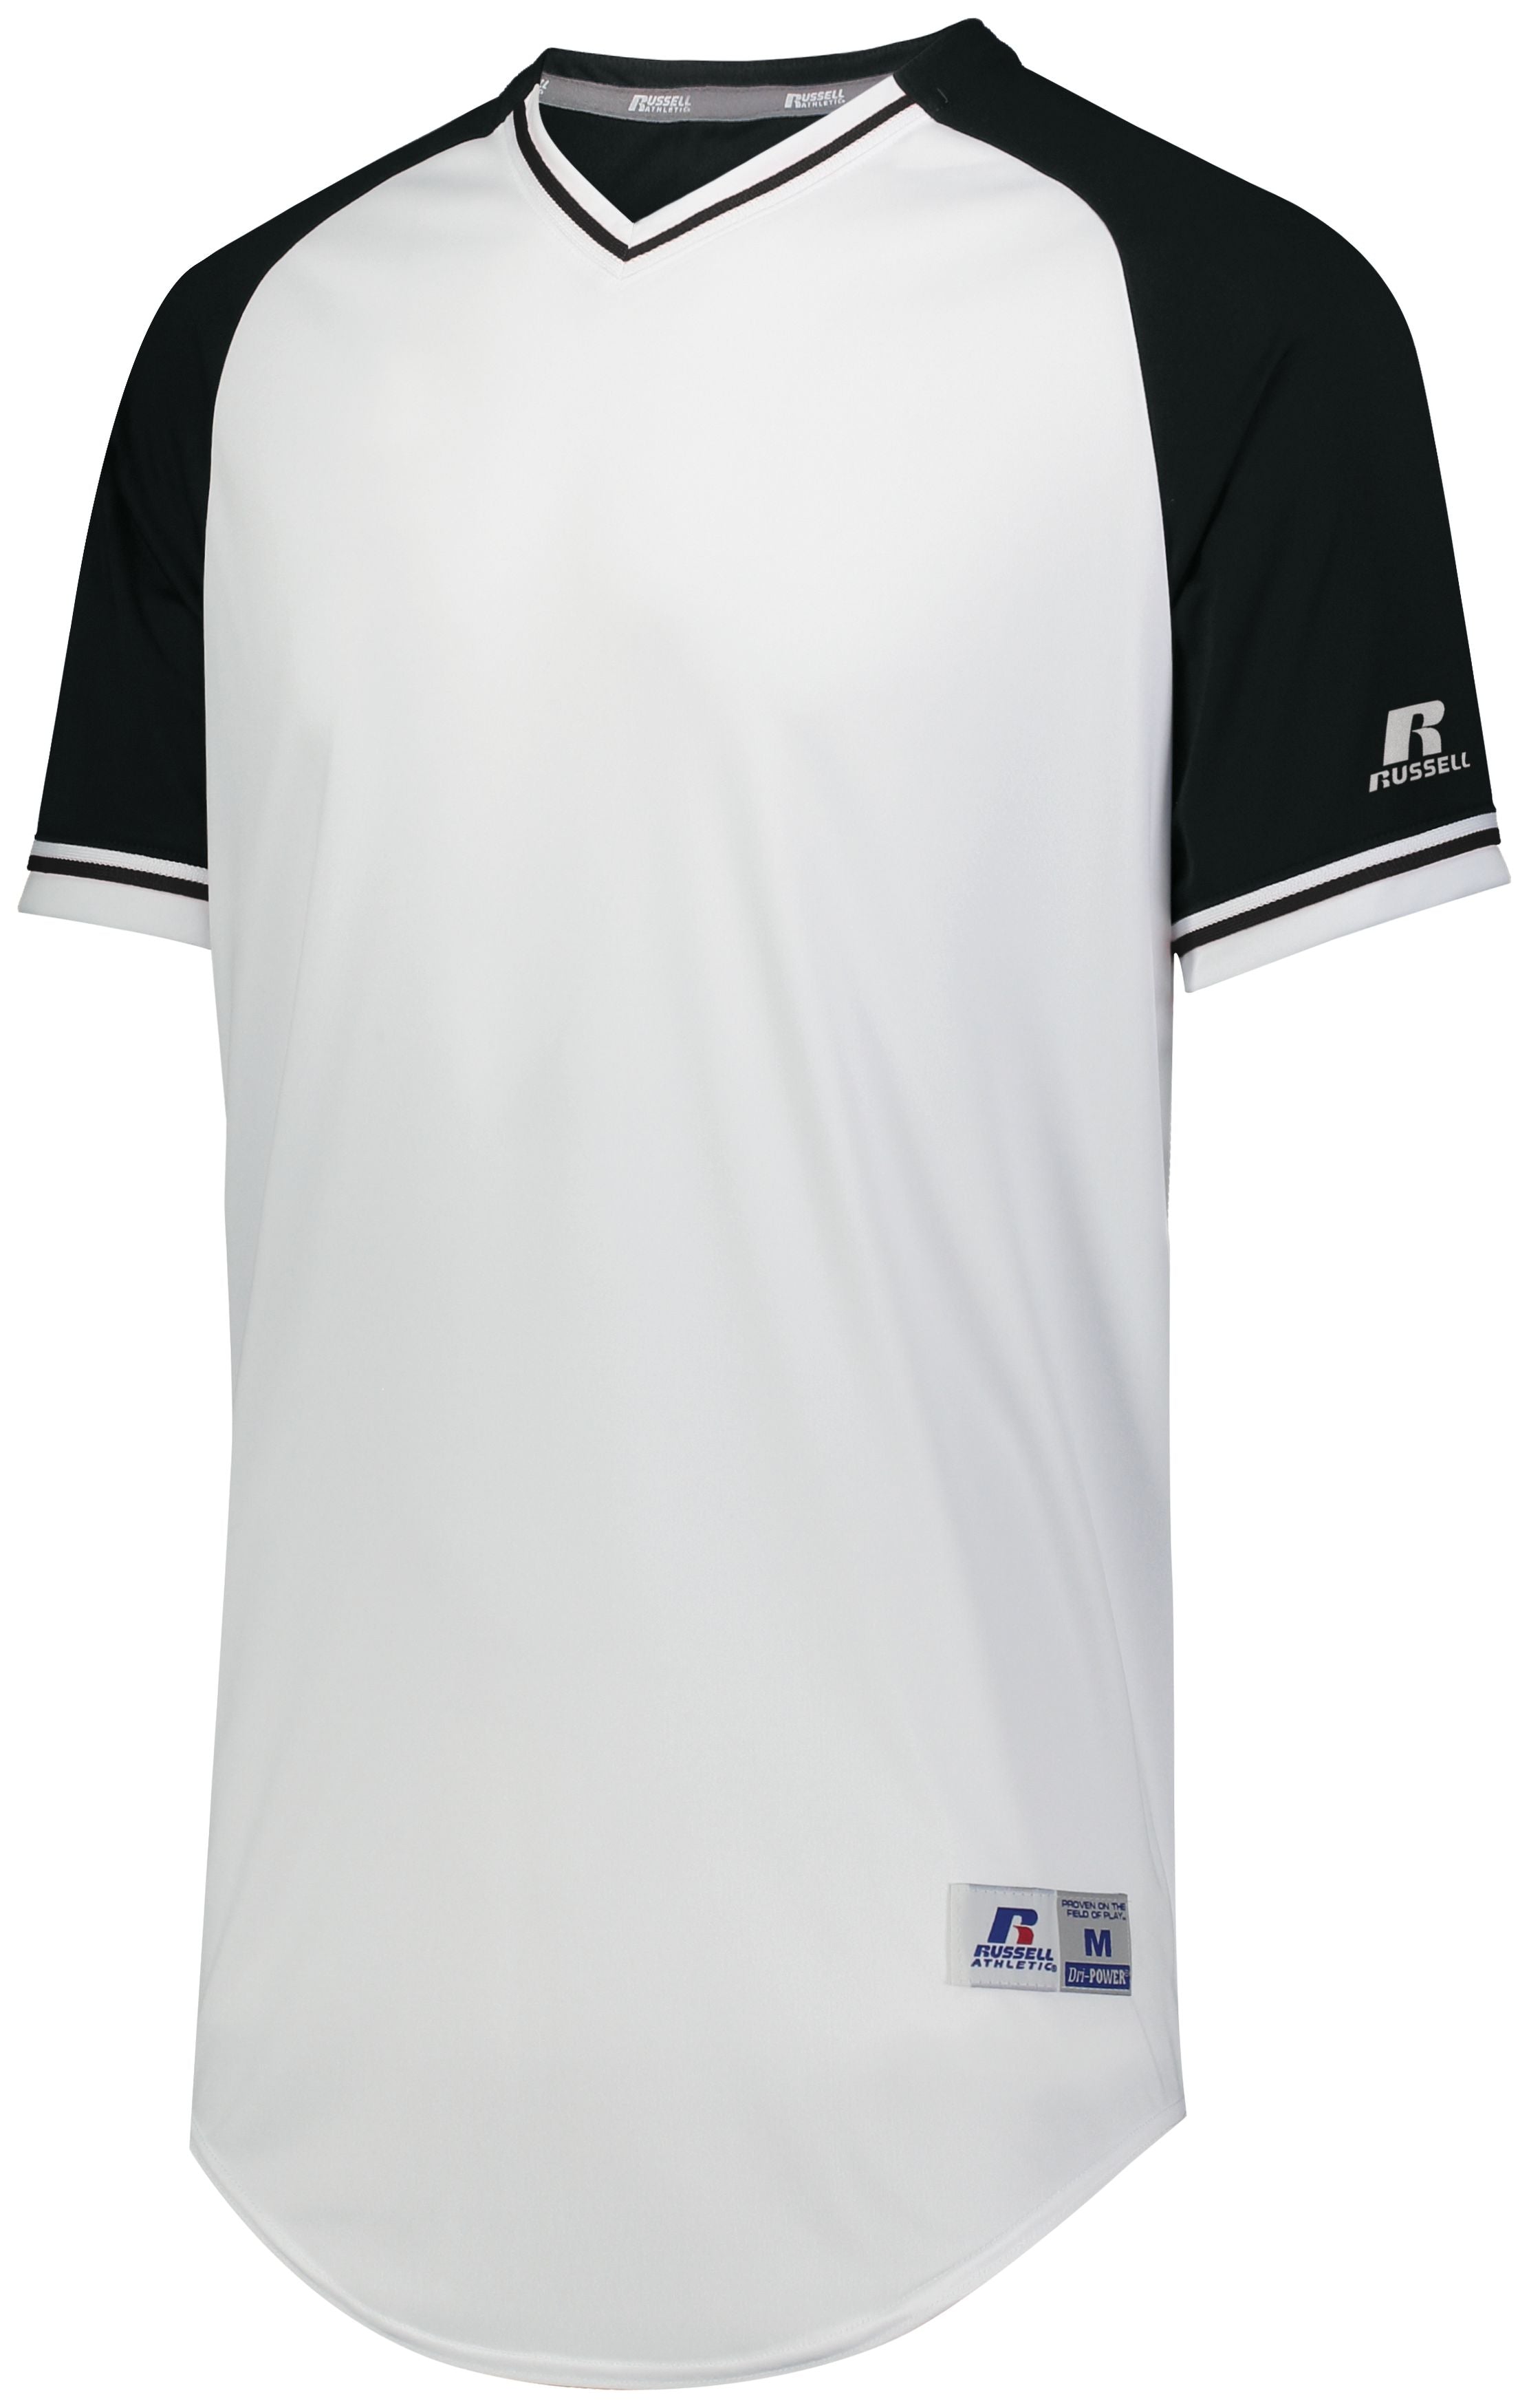 Russell Athletic Youth Classic V-Neck Jersey in White/Black/White  -Part of the Youth, Youth-Jersey, Baseball, Russell-Athletic-Products, Shirts, All-Sports, All-Sports-1 product lines at KanaleyCreations.com